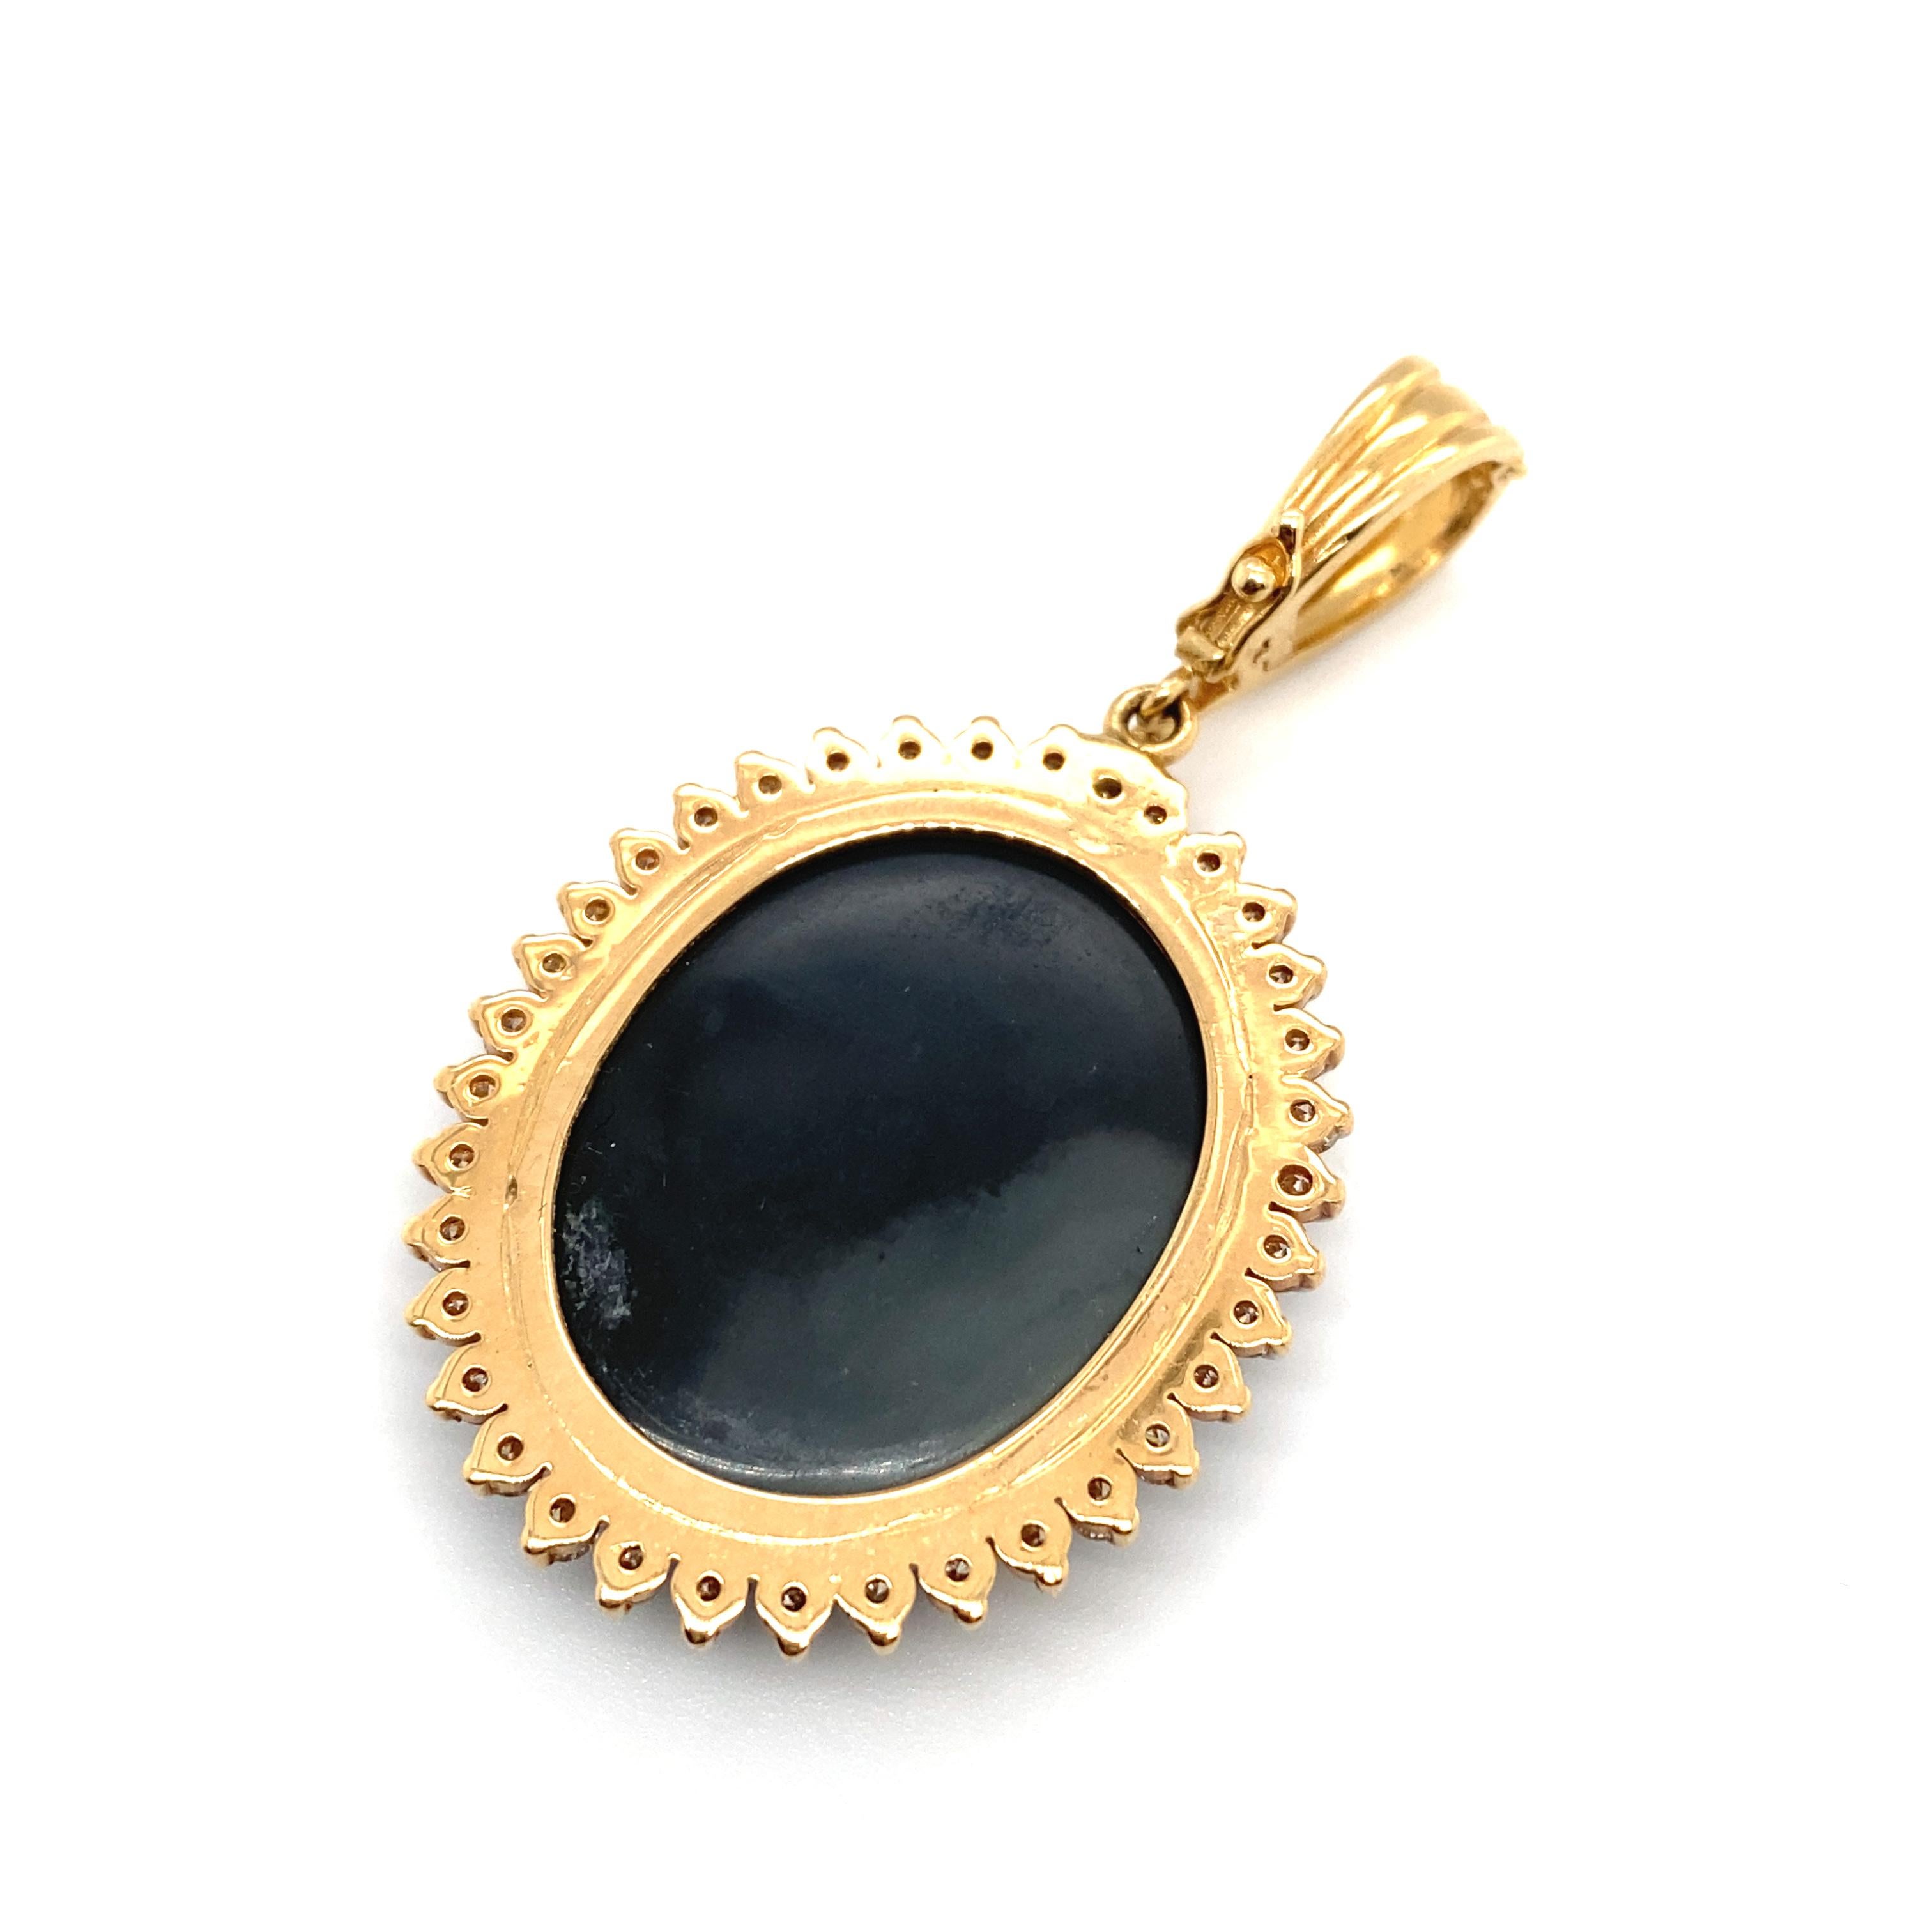 Item Details: This pendant with an oval opal doublet has a one-carat total weight diamond halo.

Circa: 2000s
Metal Type: 14 Karat Yellow Gold
Weight: 10.6 grams
Size: 2 inch Length including bail

Diamond Details:

Carat: 1.0 carat total